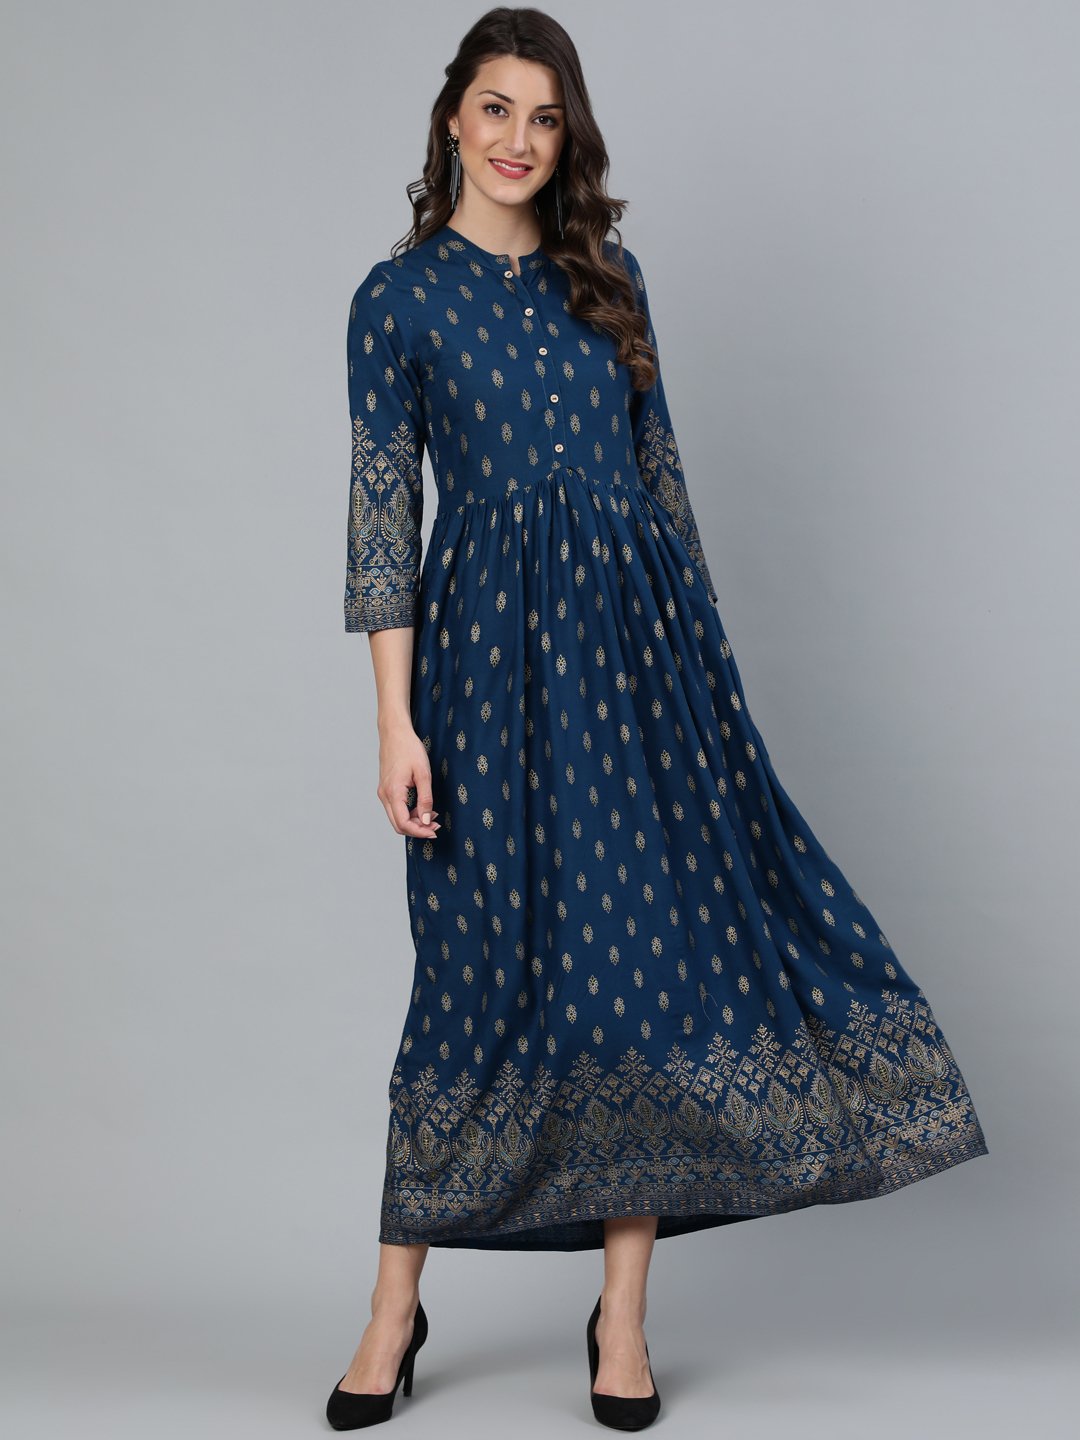 Women's Teal Blue Printed Maxi Dress With Three Quarter Sleeves - Final Clearance Sale